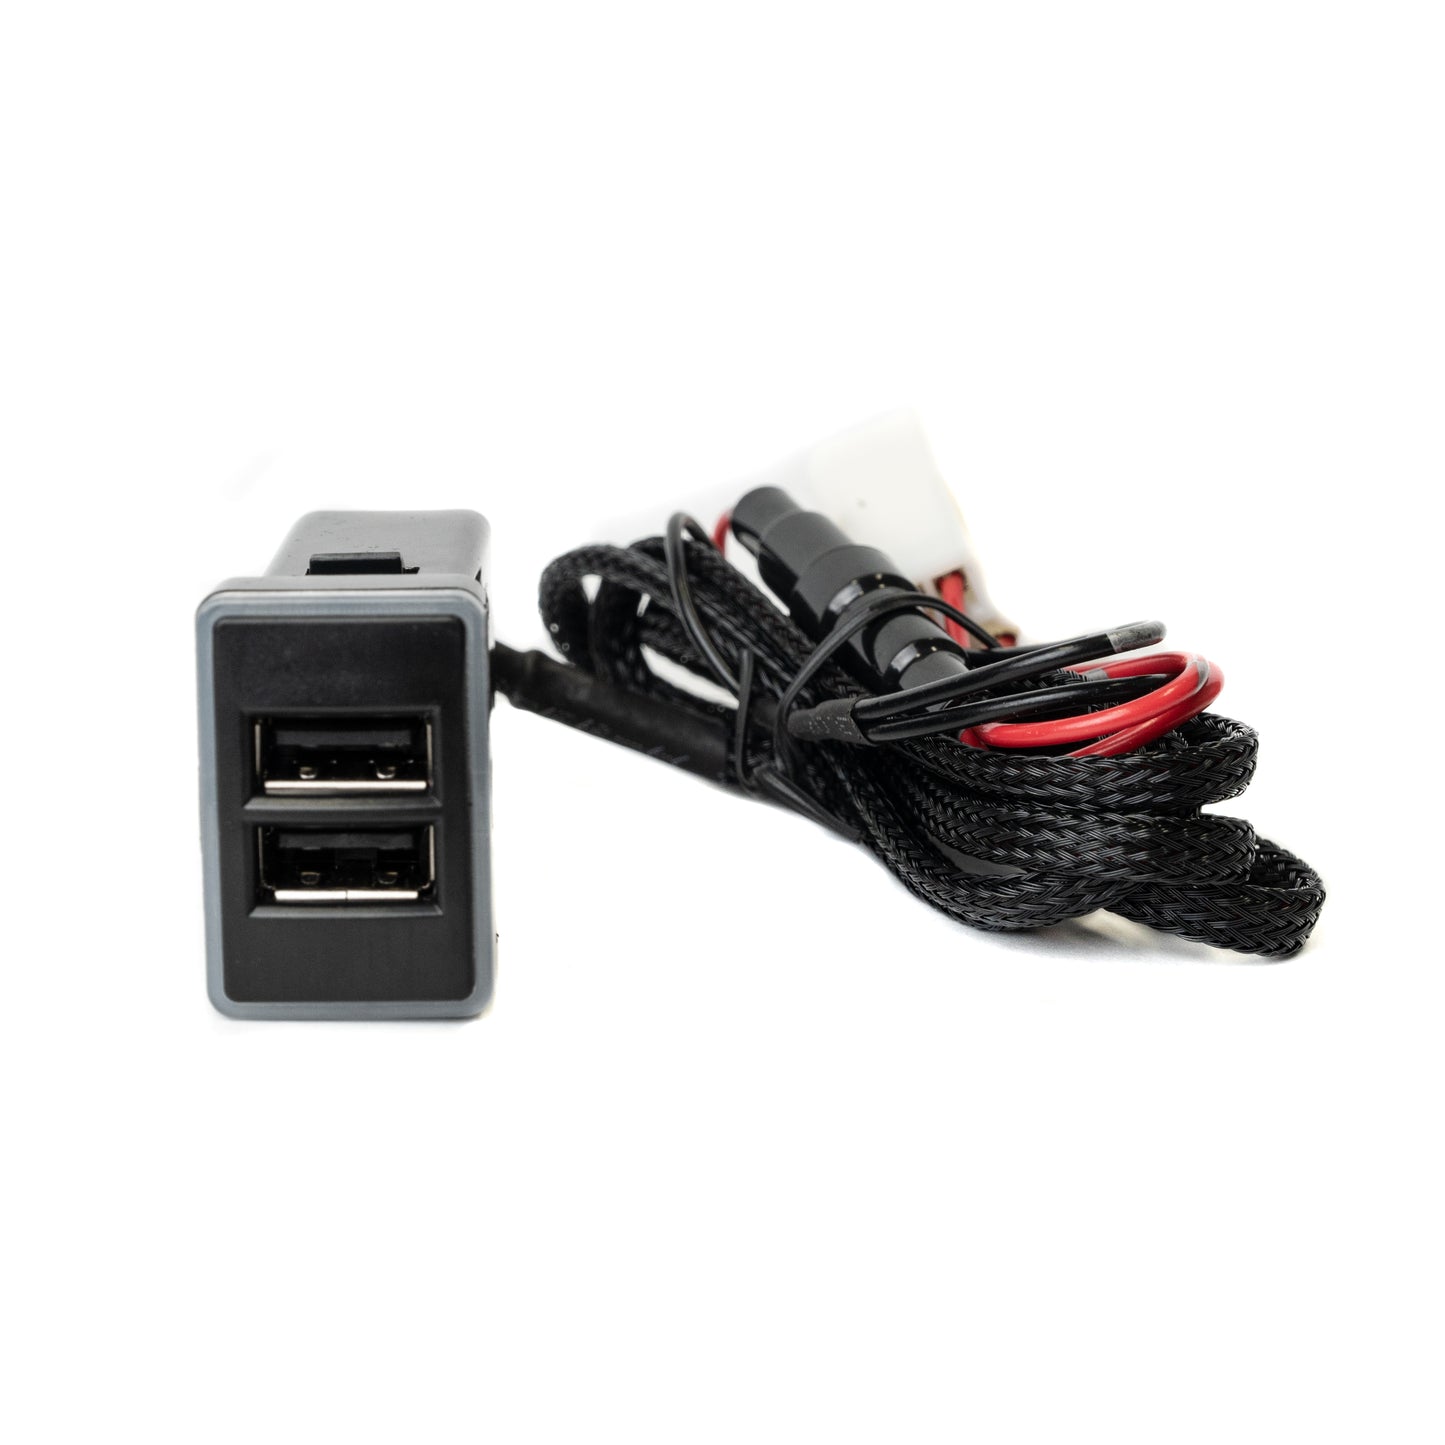 USB Dual Port to suit 200 Series